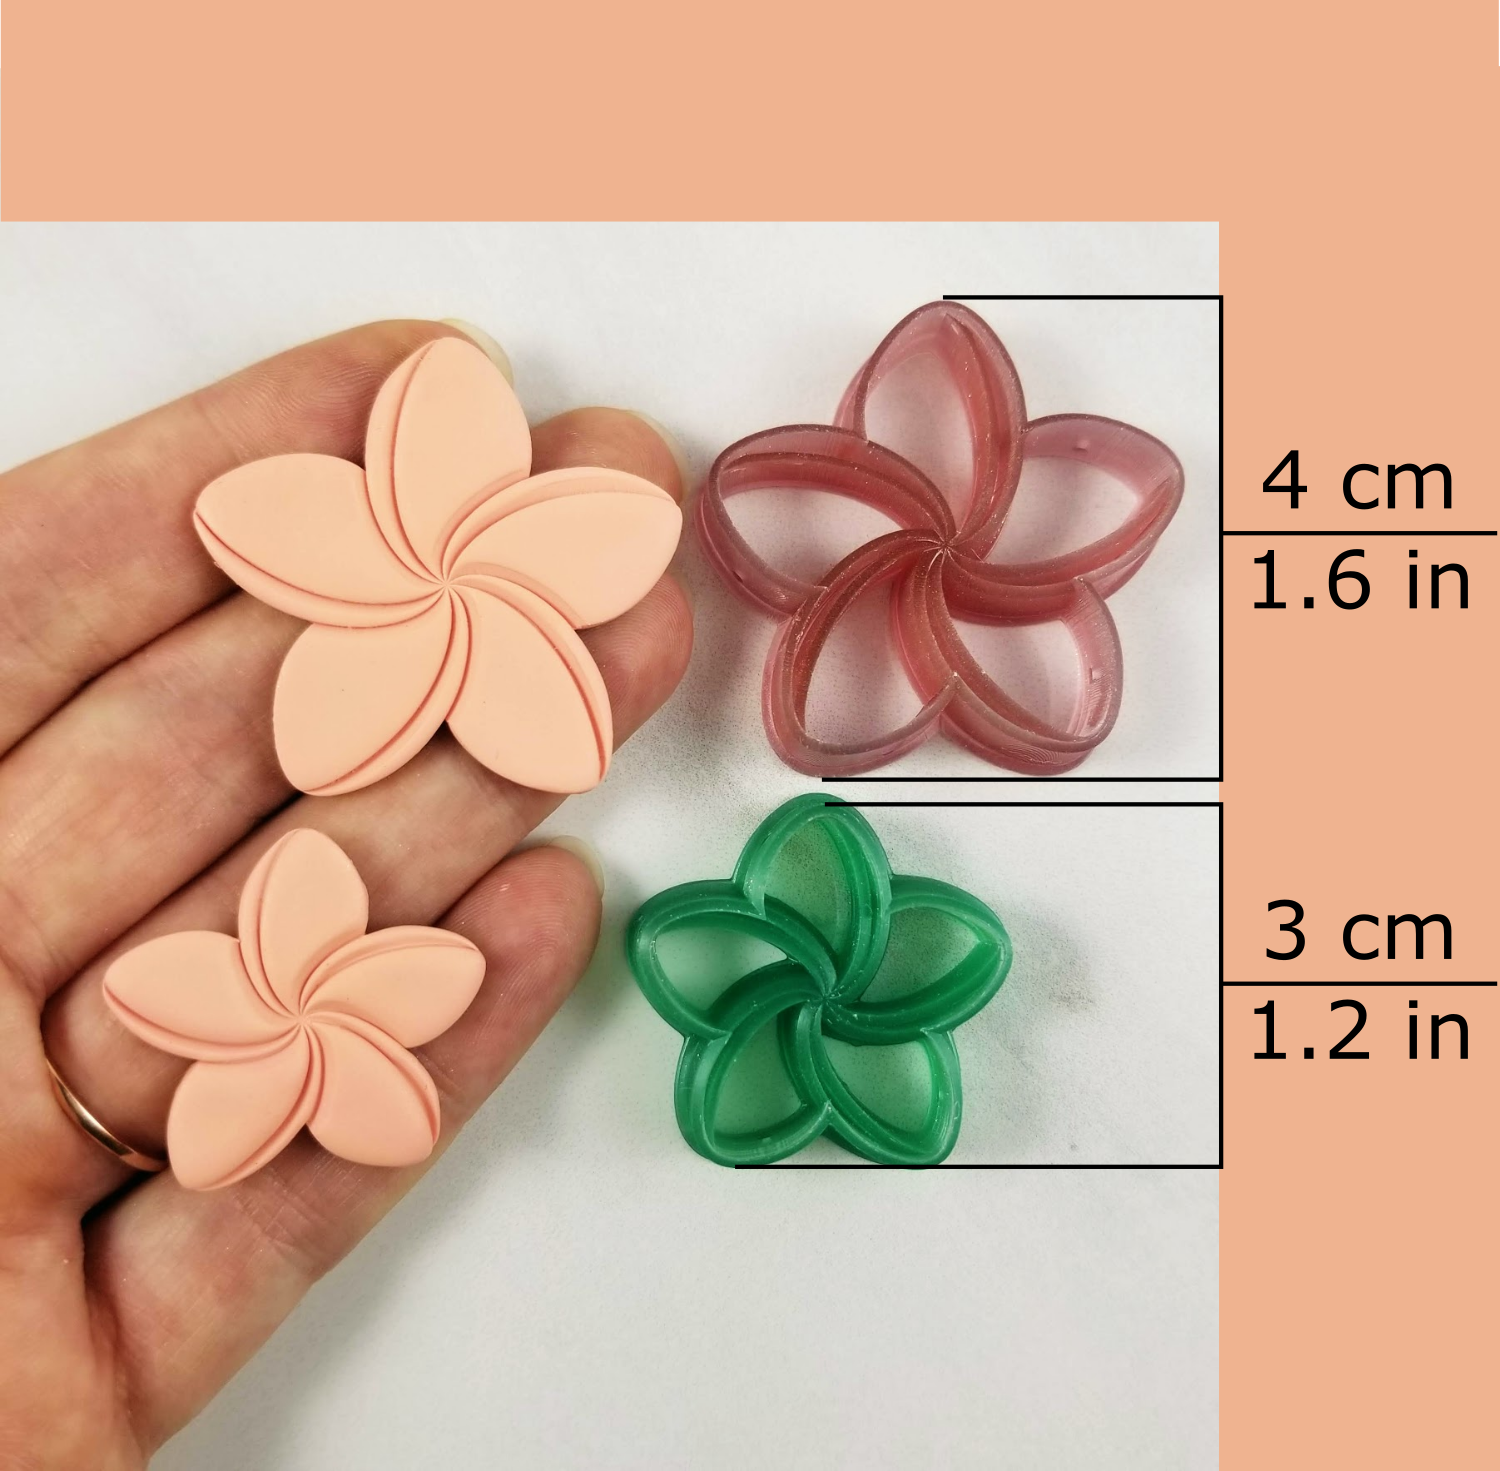 Plumeria polymer clay cutter available sizes, 4 centimeters / 1.6 inches, 3 centimeters / 1.2 inches